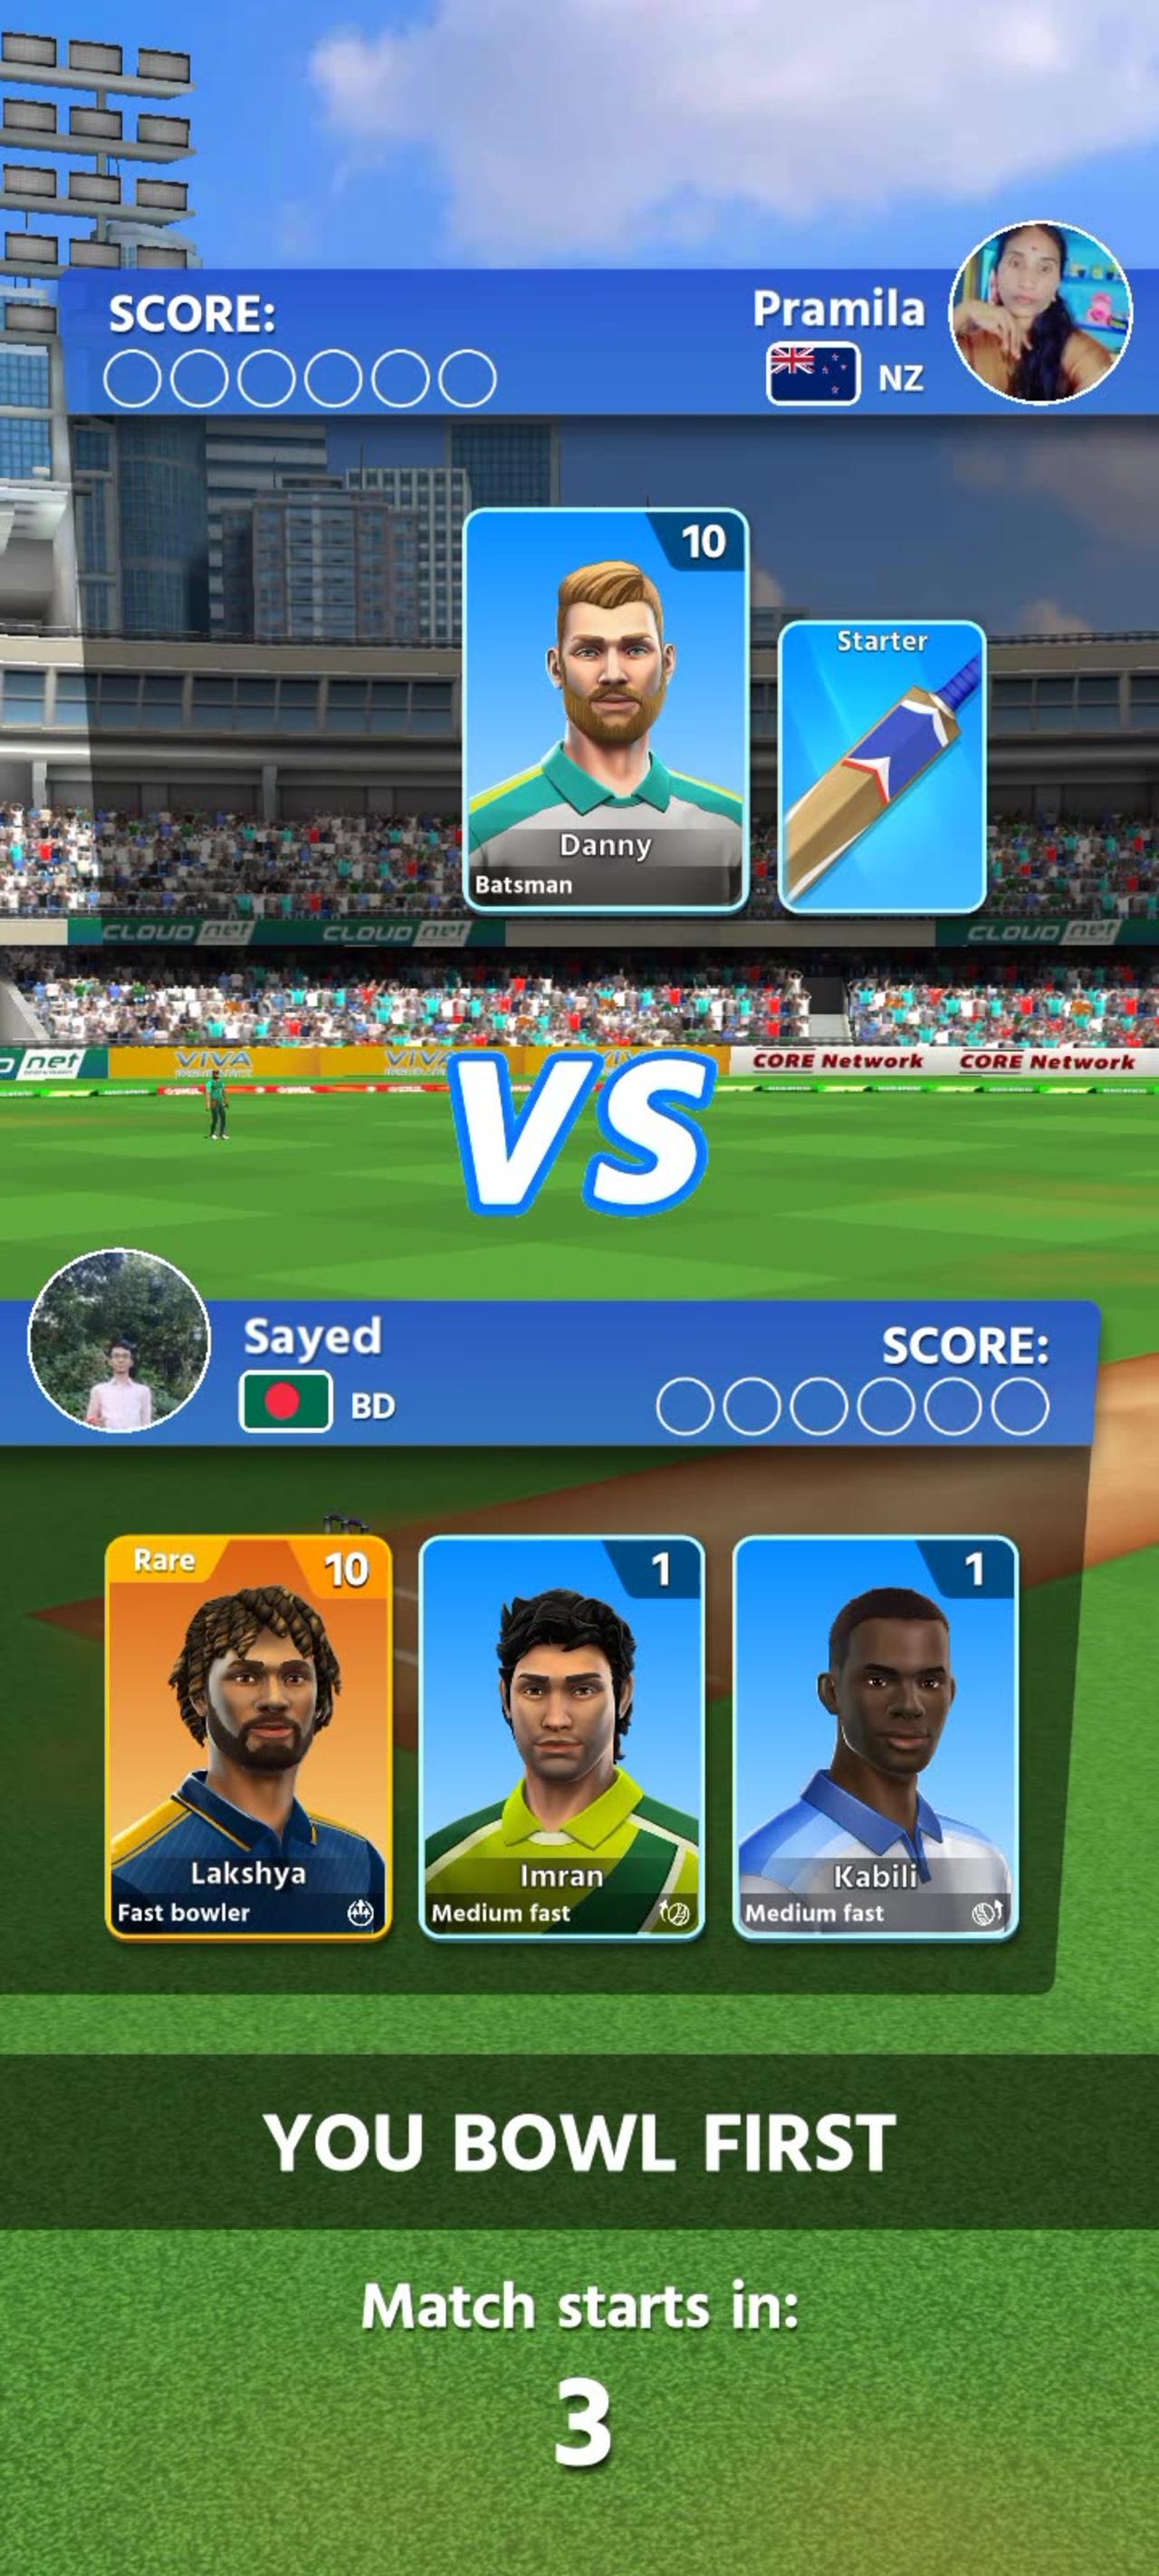 Opponent afraid my bowlers so he leave in cricket 😜